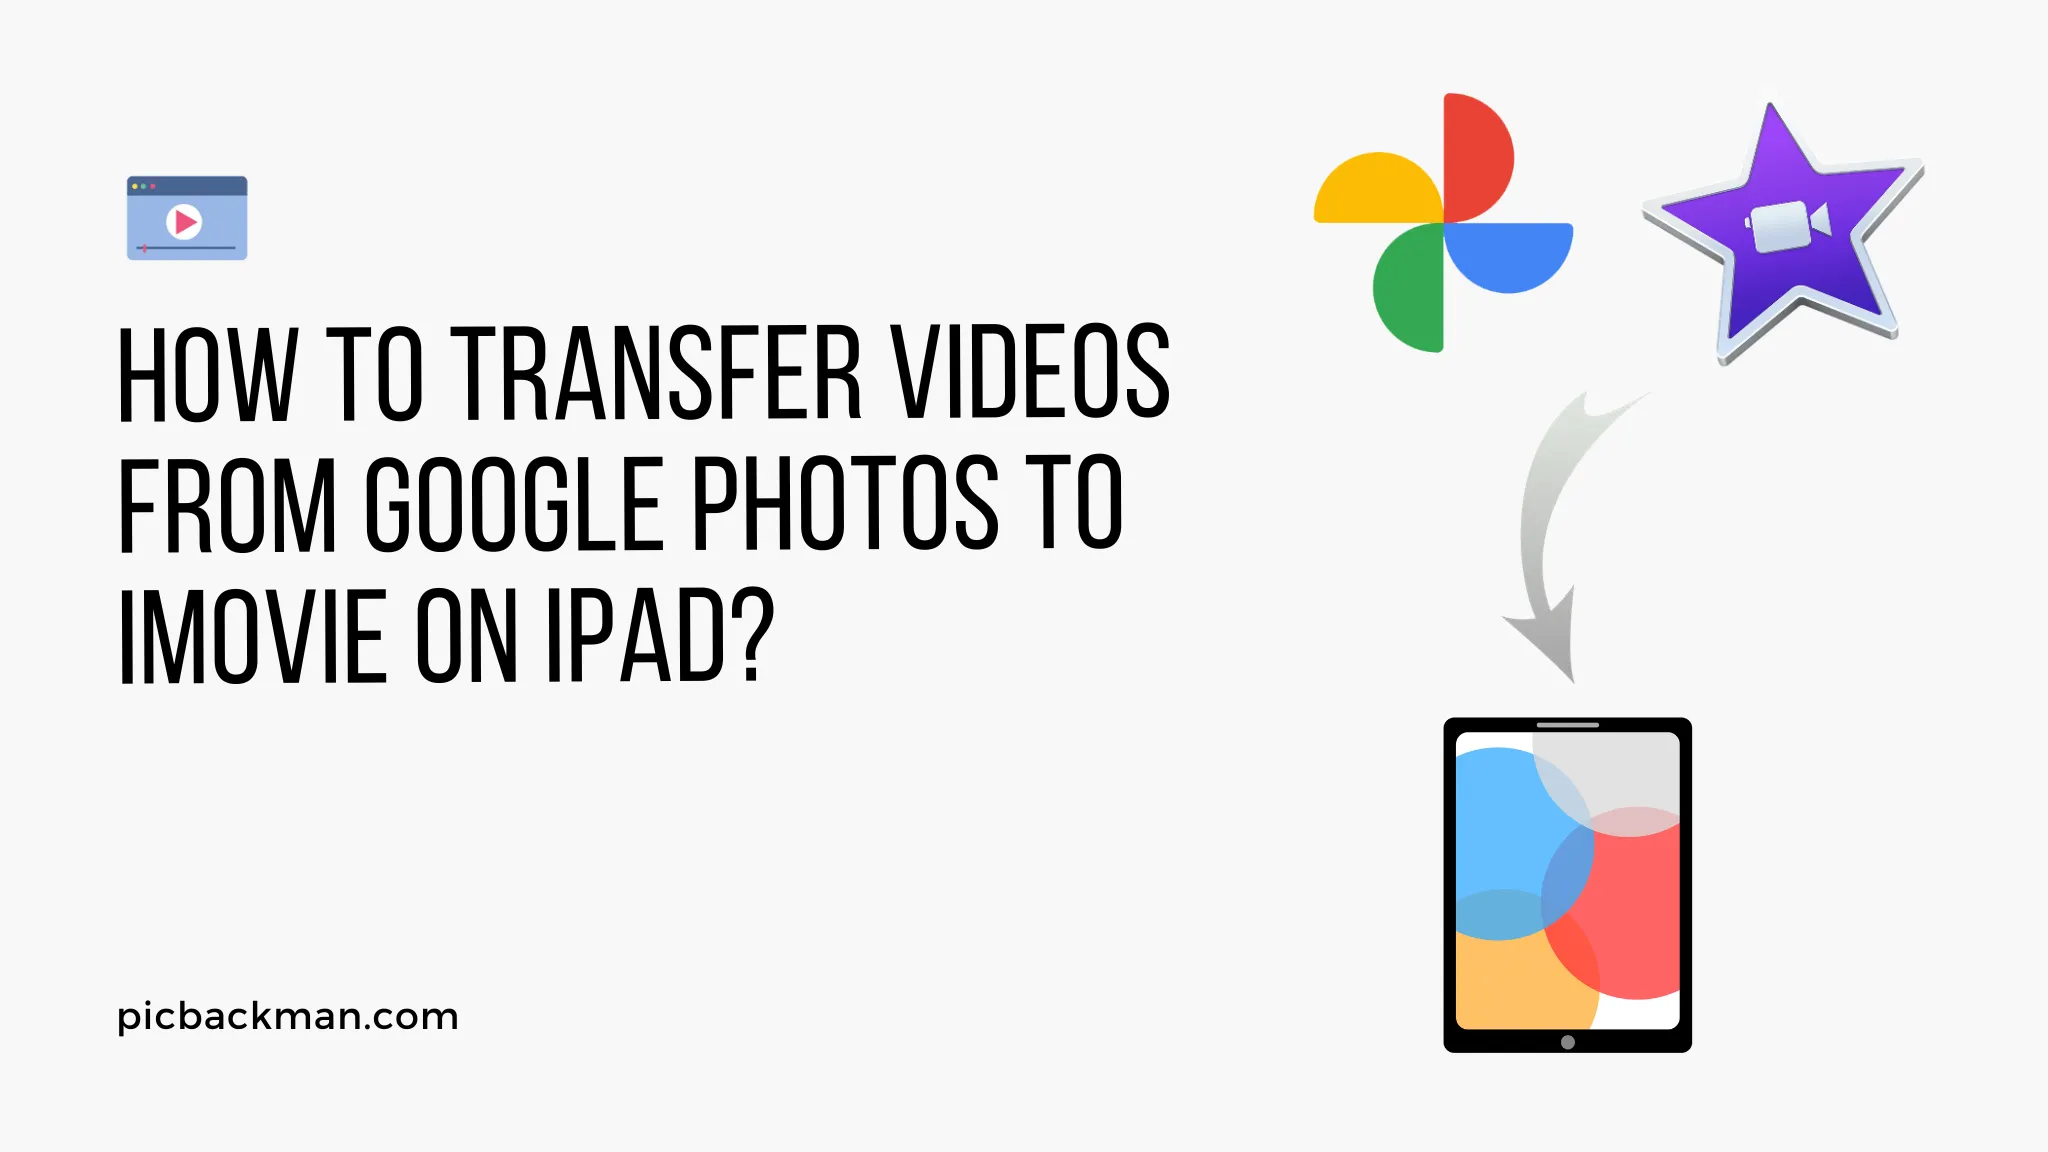 How to Transfer Videos from Google Photos to iMovie on iPad?